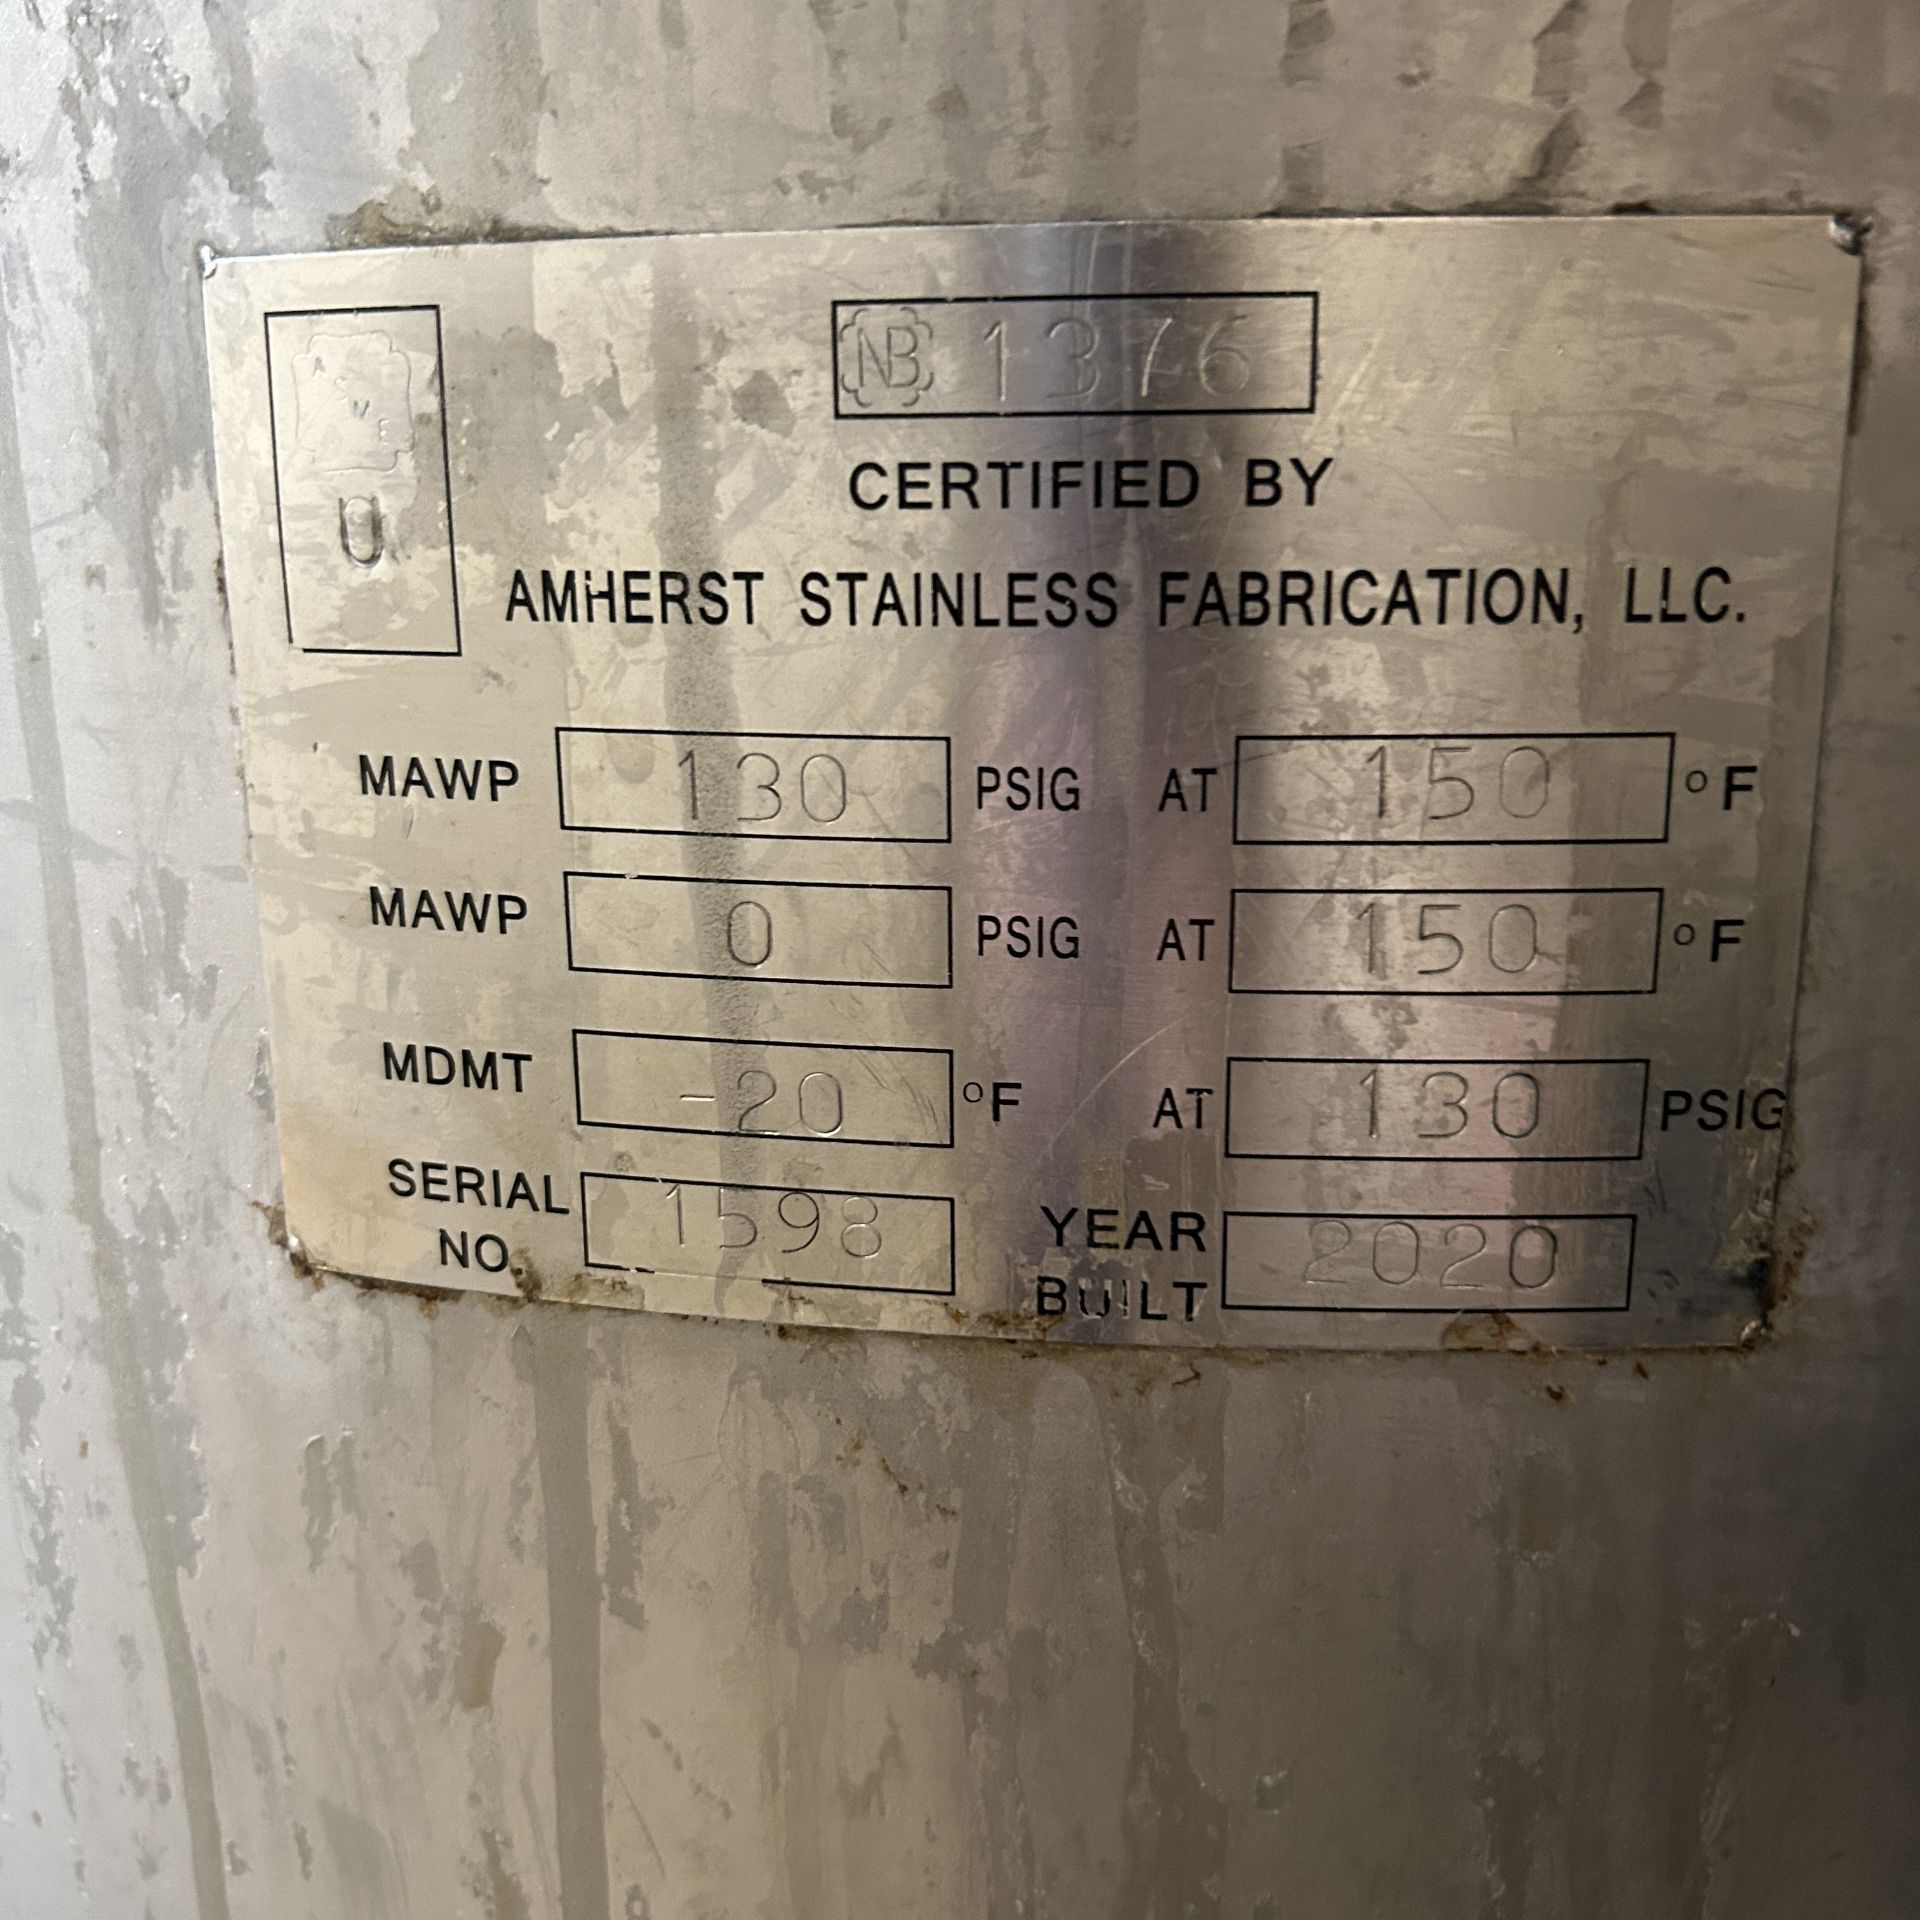 2020 Amherst Stainless Steel Agitation Pressure Pot - Image 8 of 8